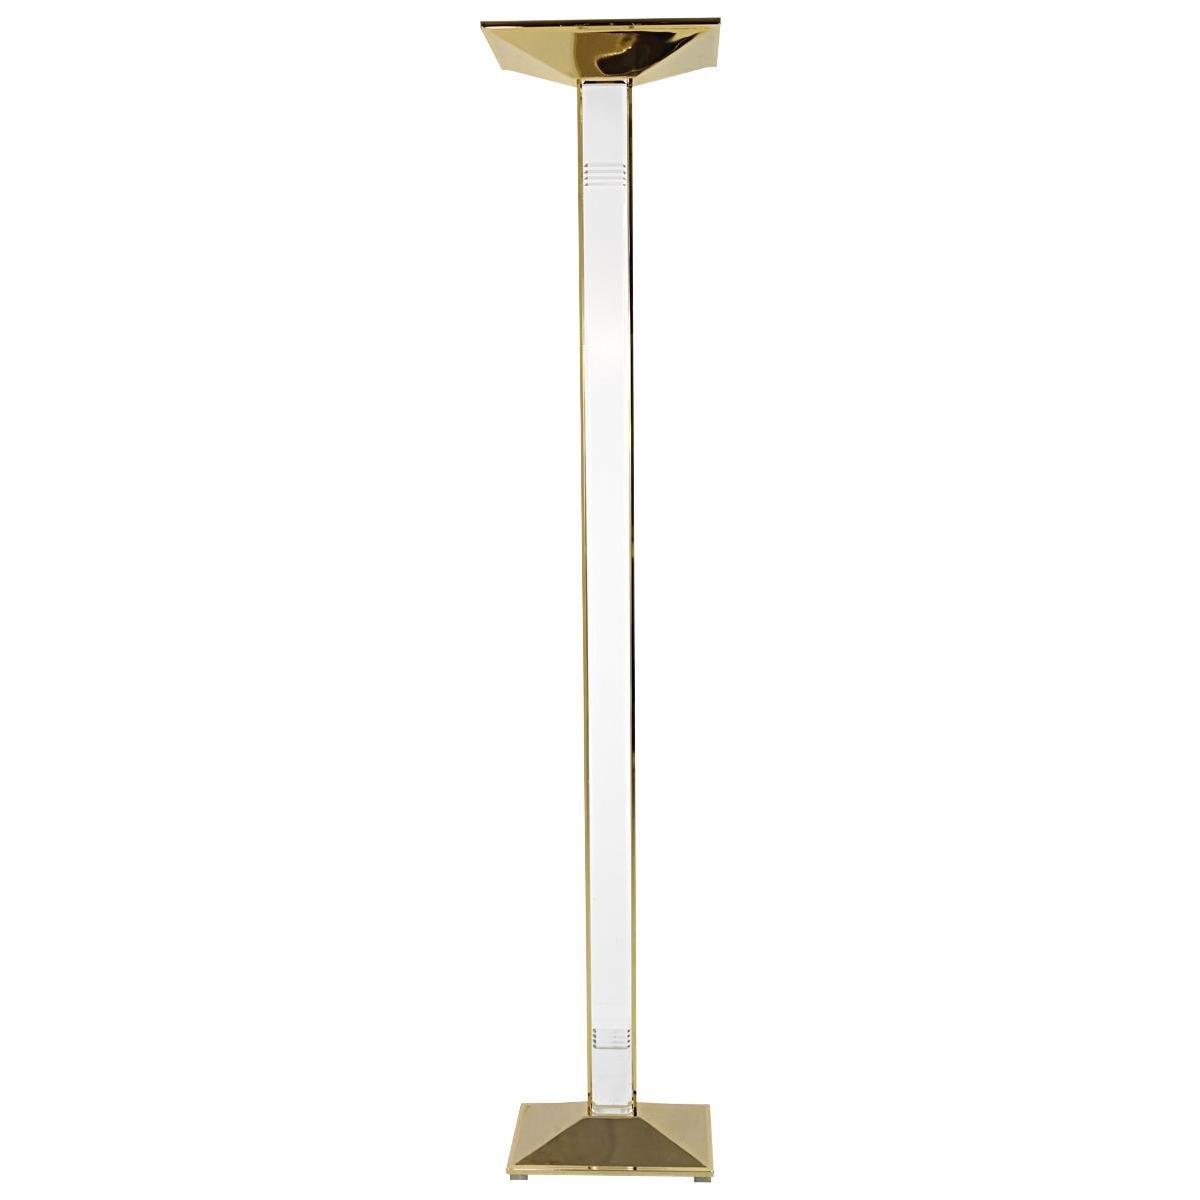 Hollywood Regency Rare Uplighter Floor Lamp in Brass and Lucite For Sale